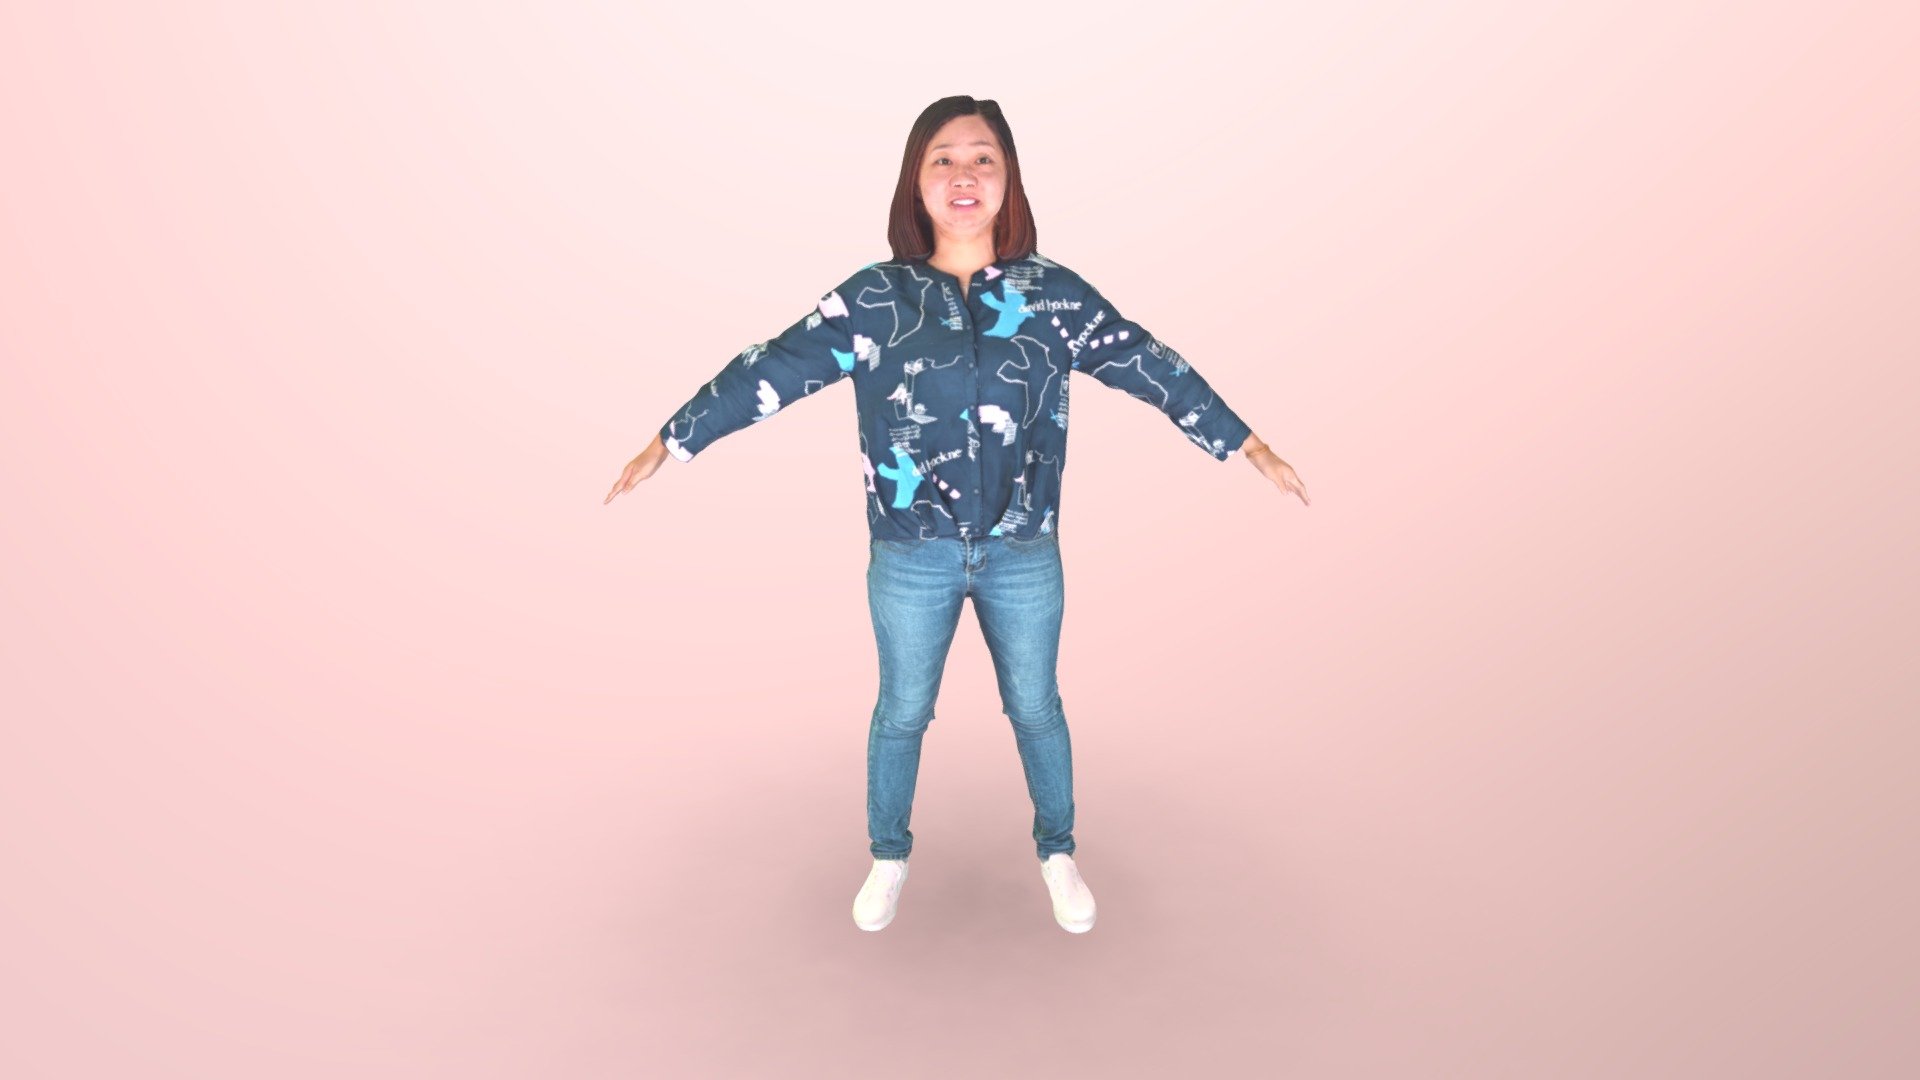 618-T Pose - 3D model by stupidboy34 3d model